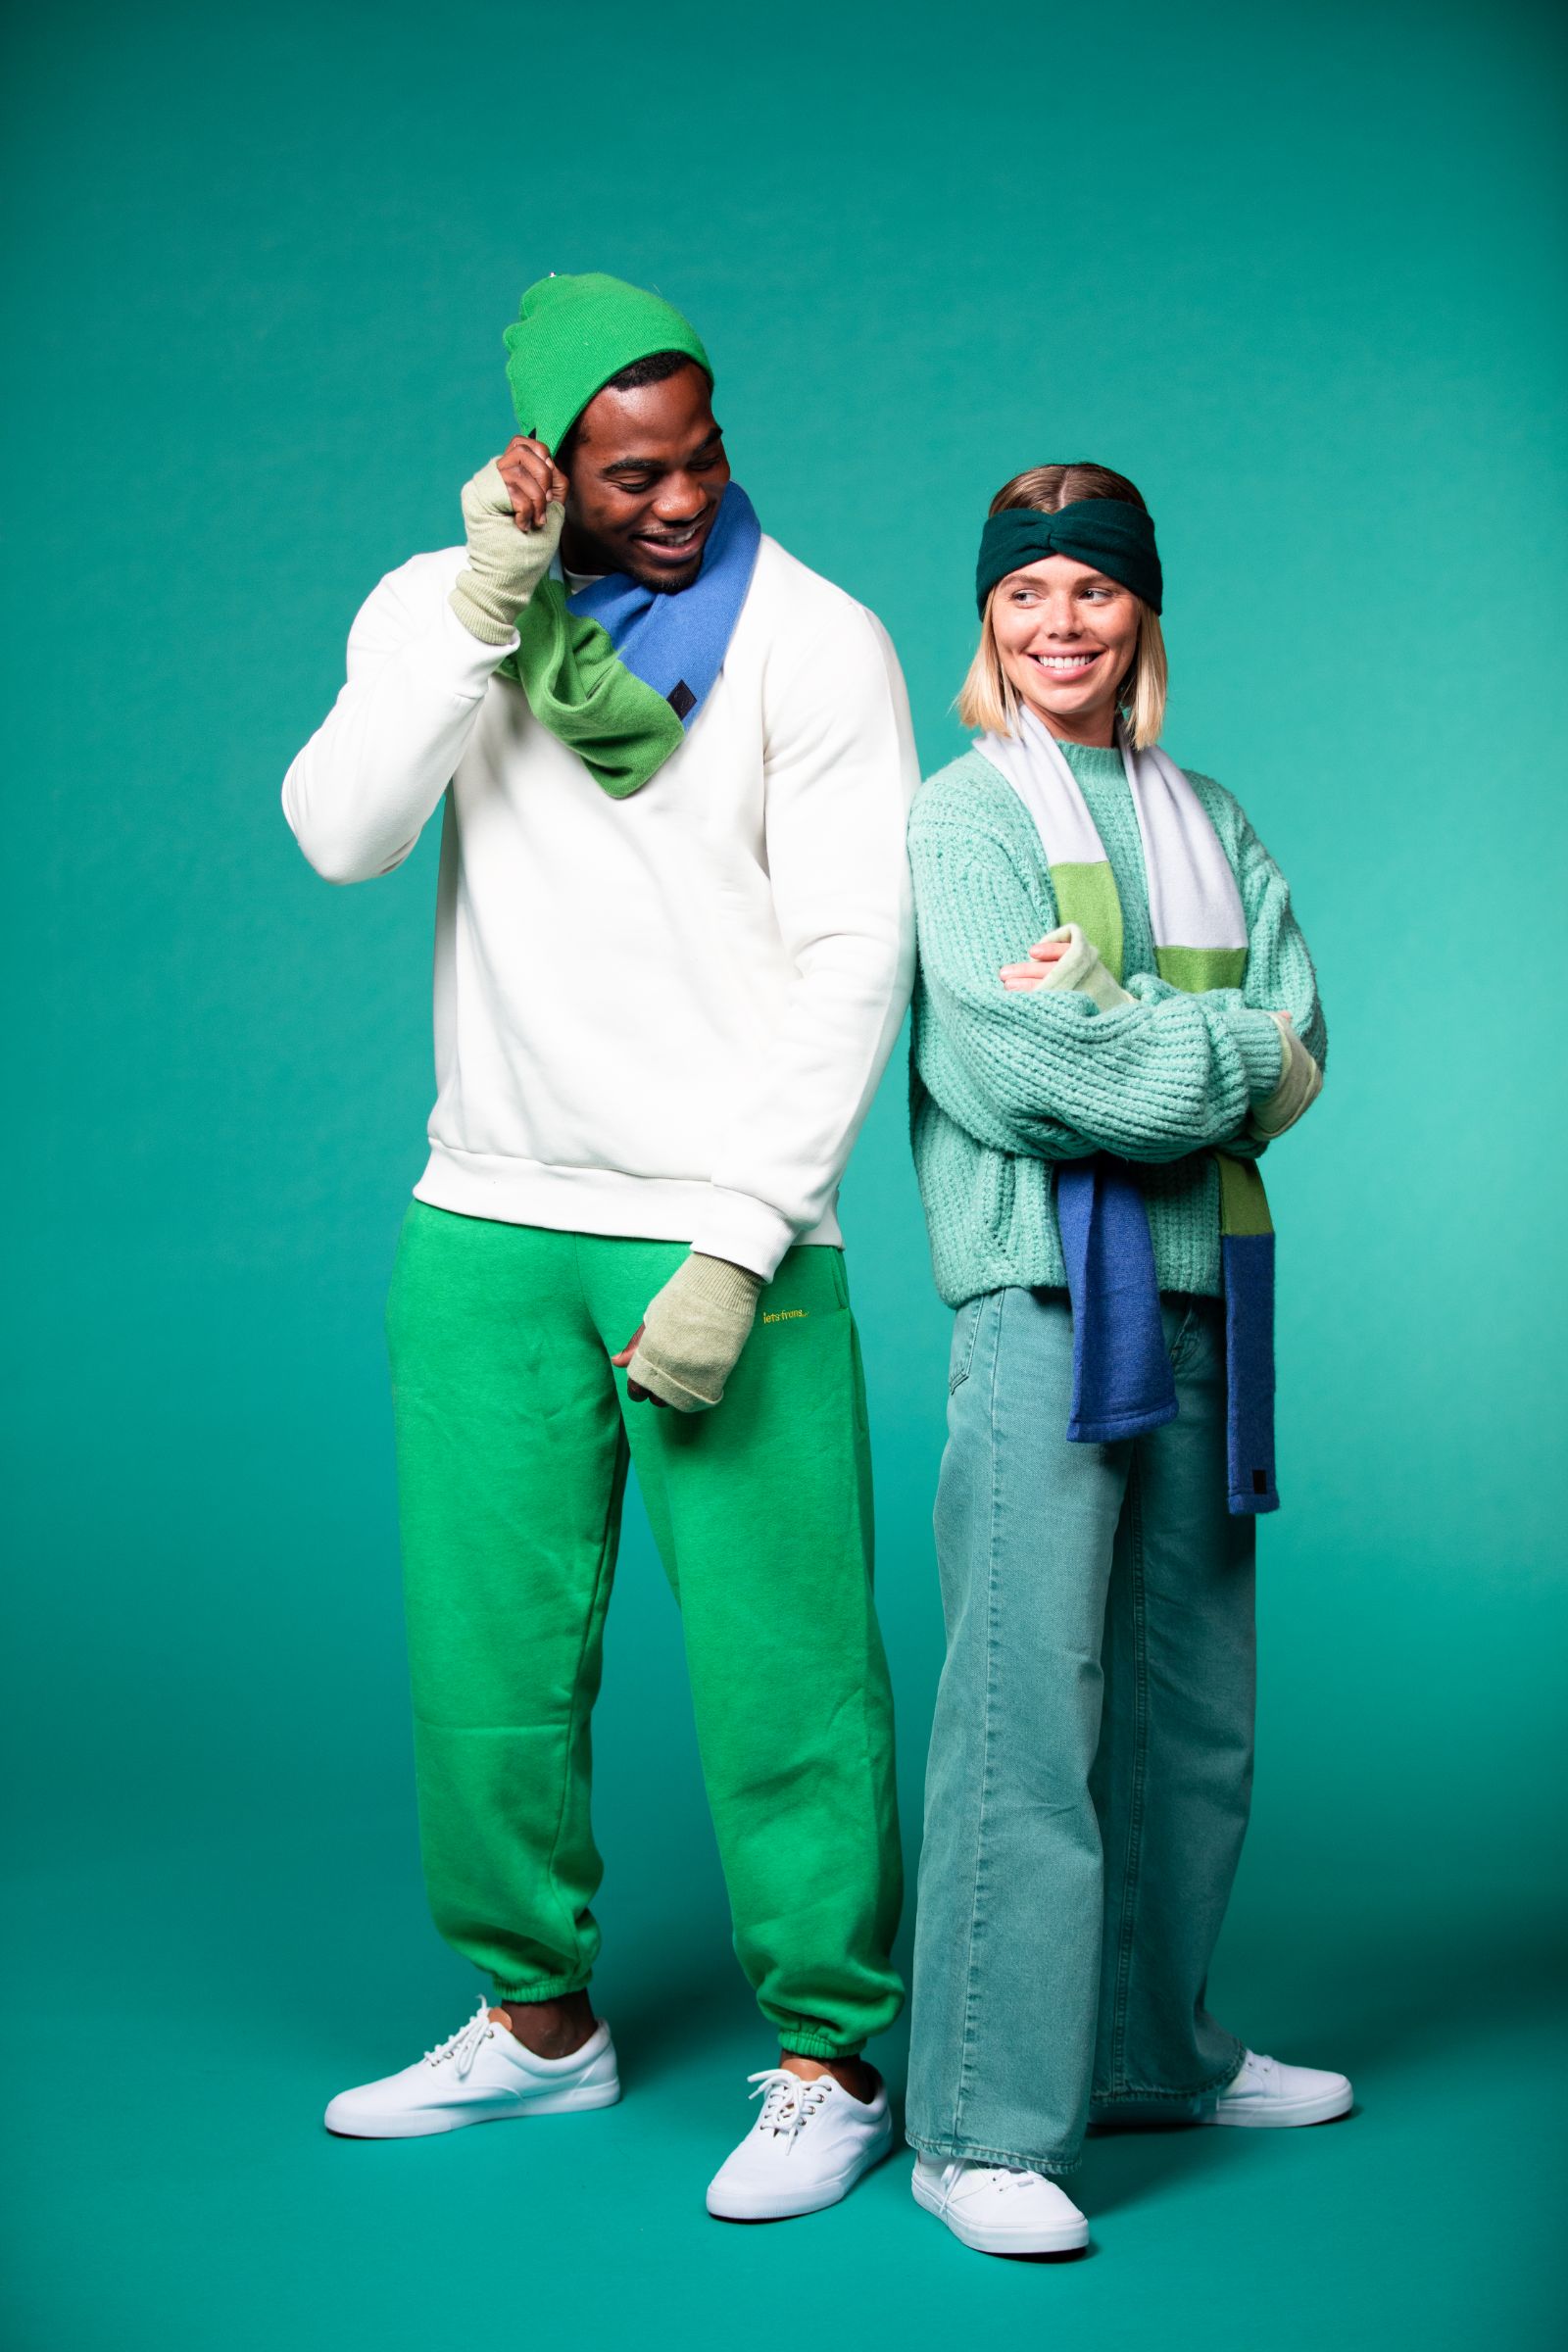 African American Male and female models posing for the camera smiling against a teal backdrop